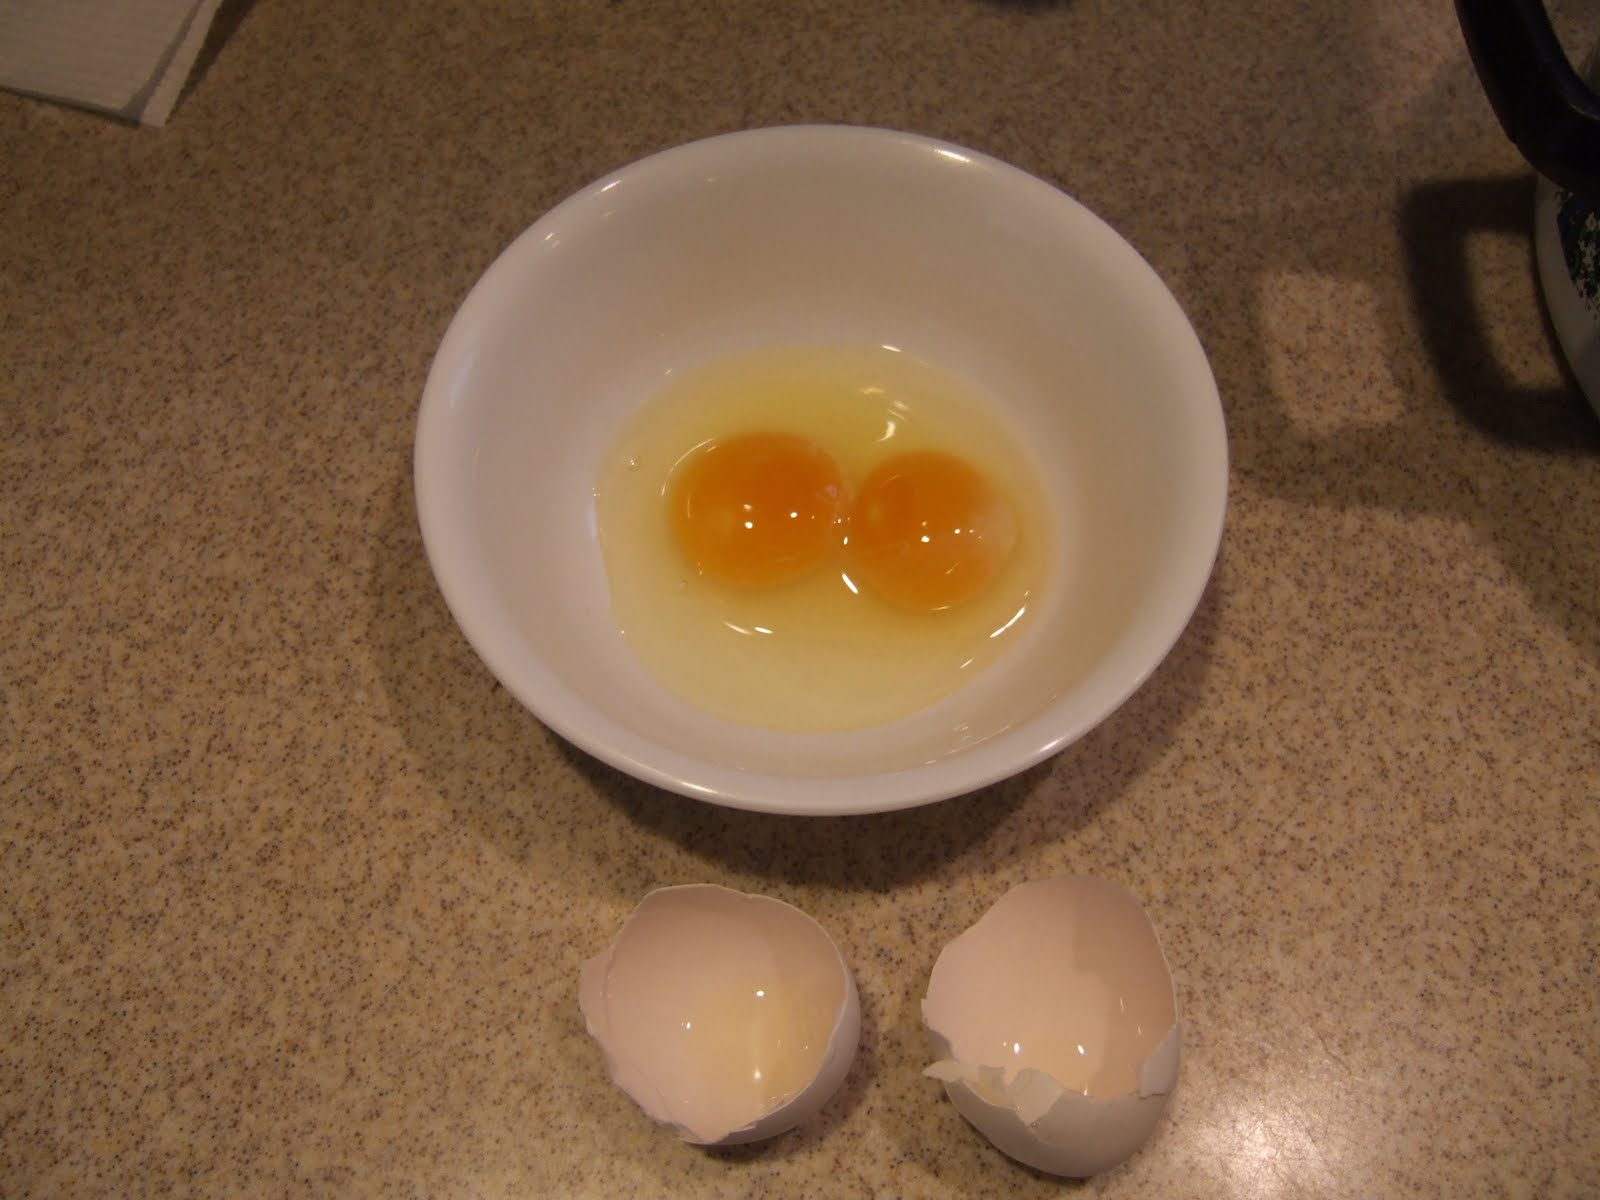 Double Yolked Eggs